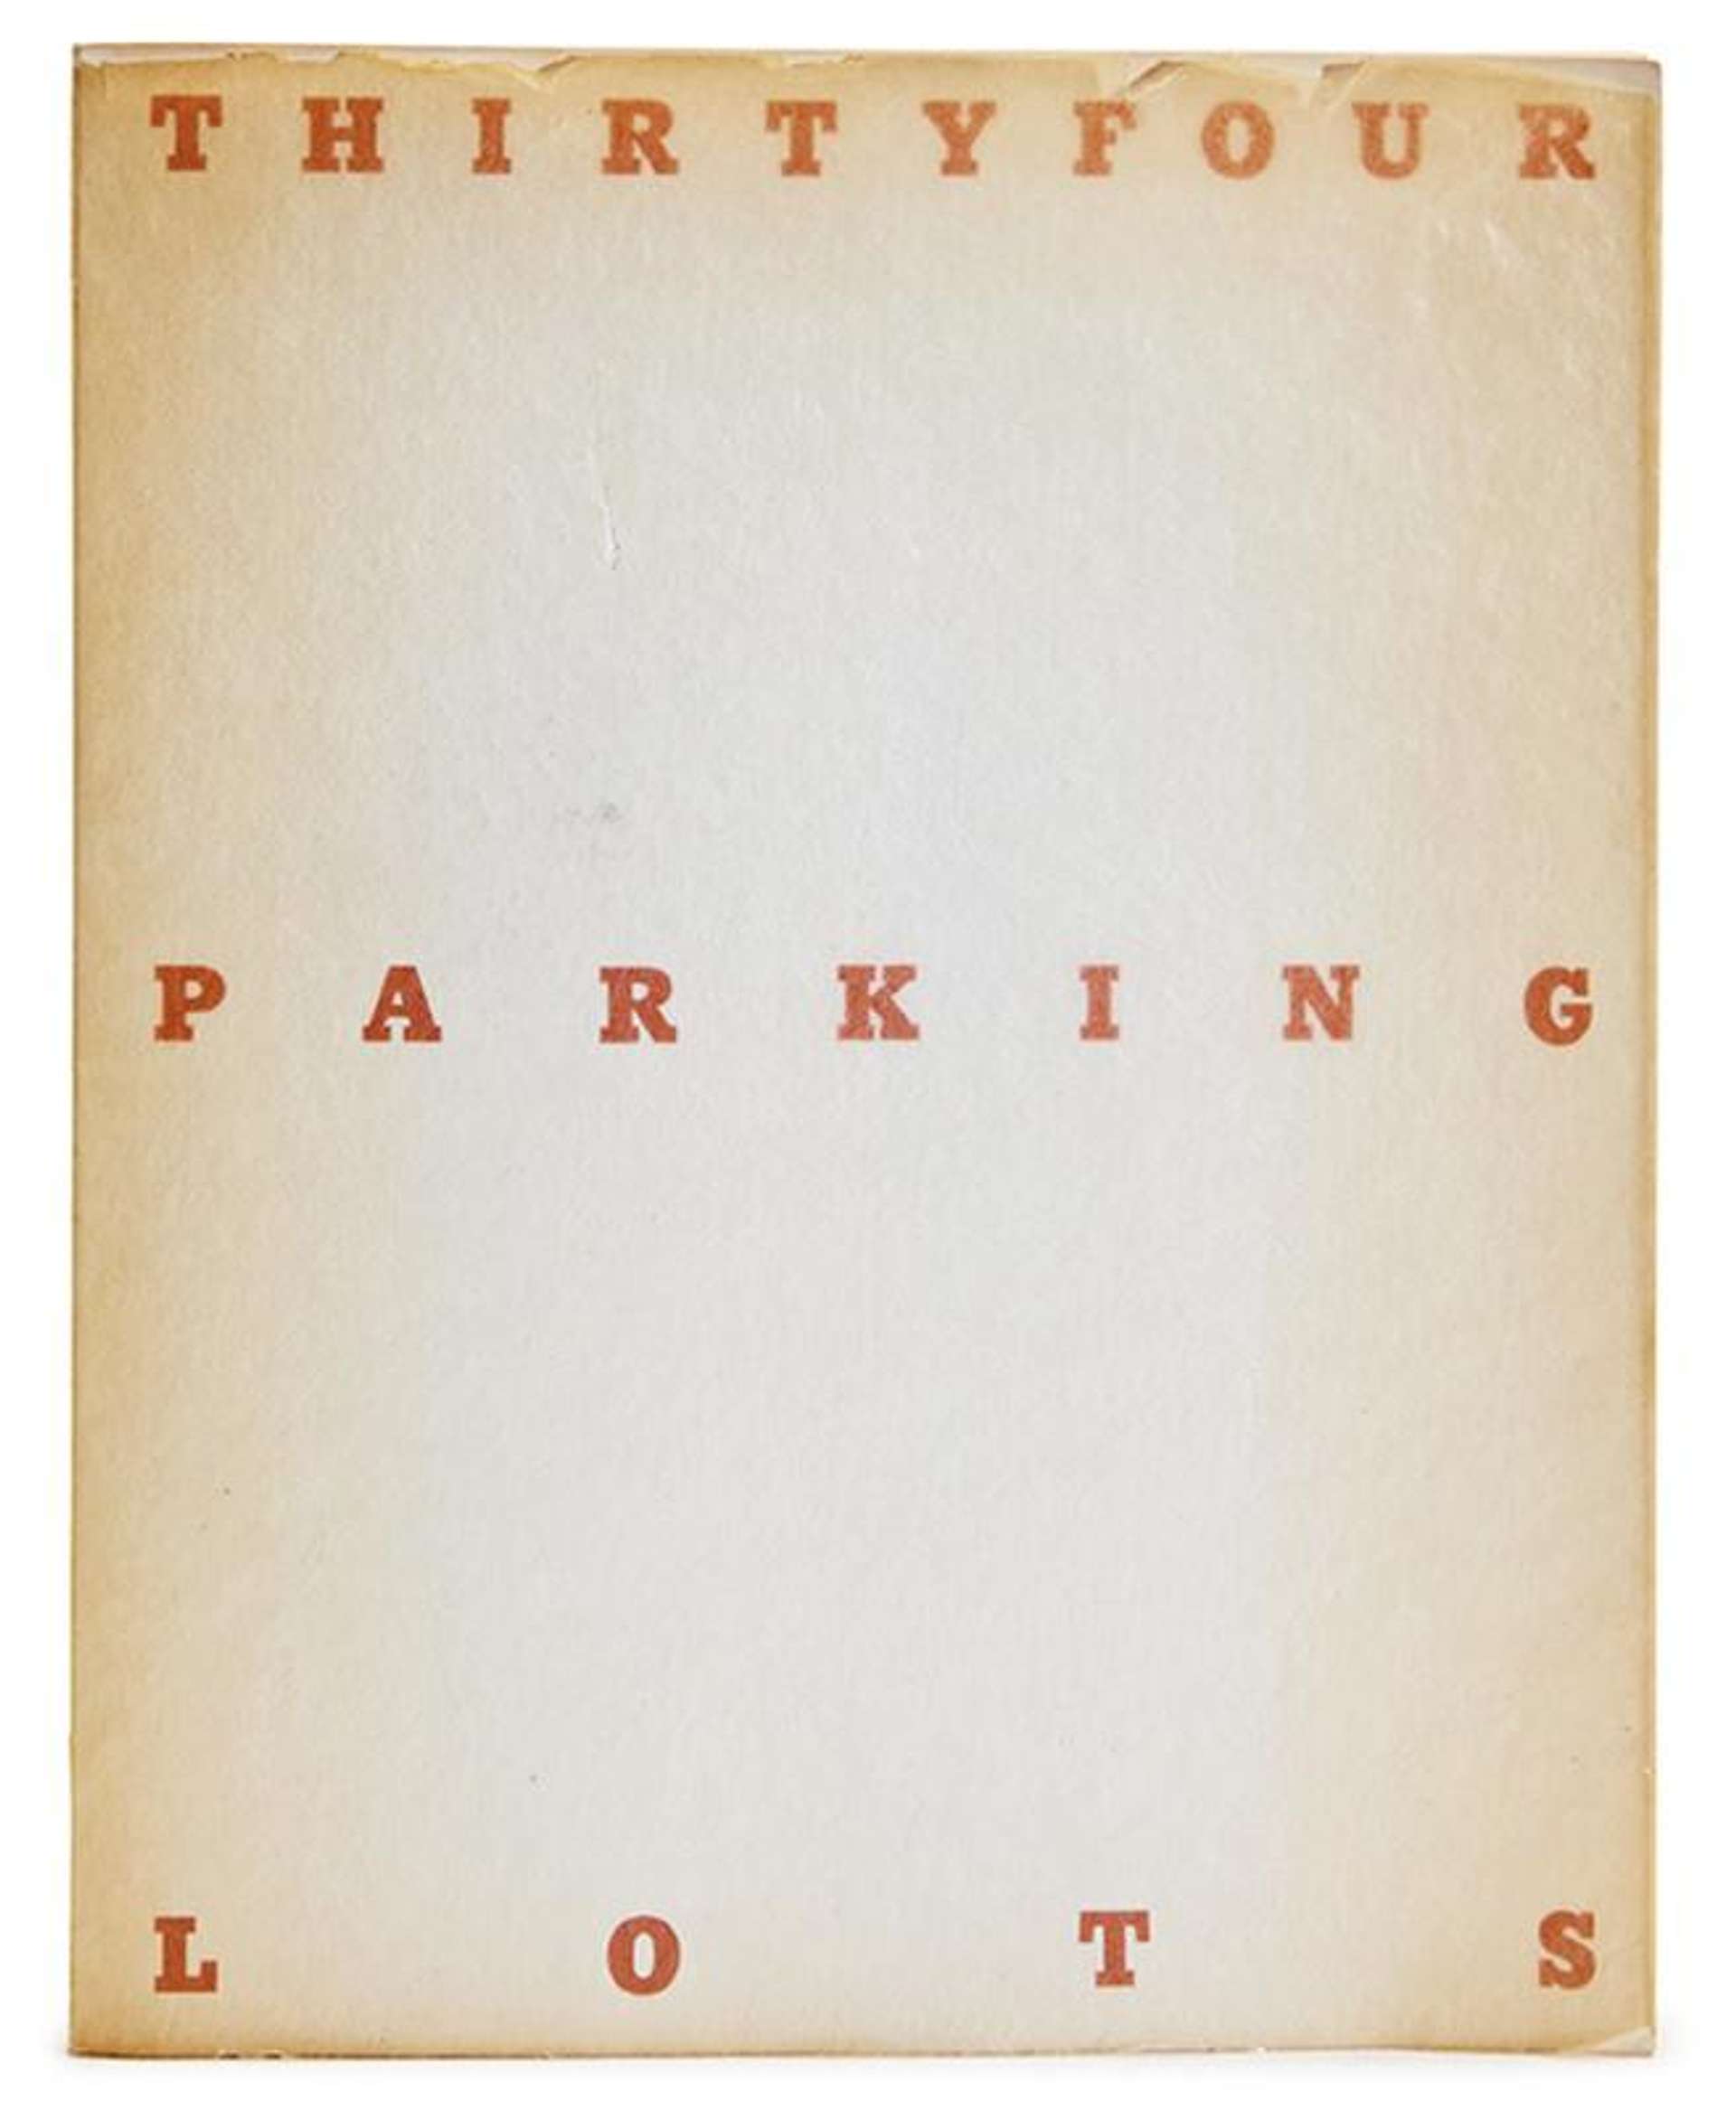 Thirtyfour Parking Lots In Los Angeles - Unsigned Print by Ed Ruscha 1967 - MyArtBroker